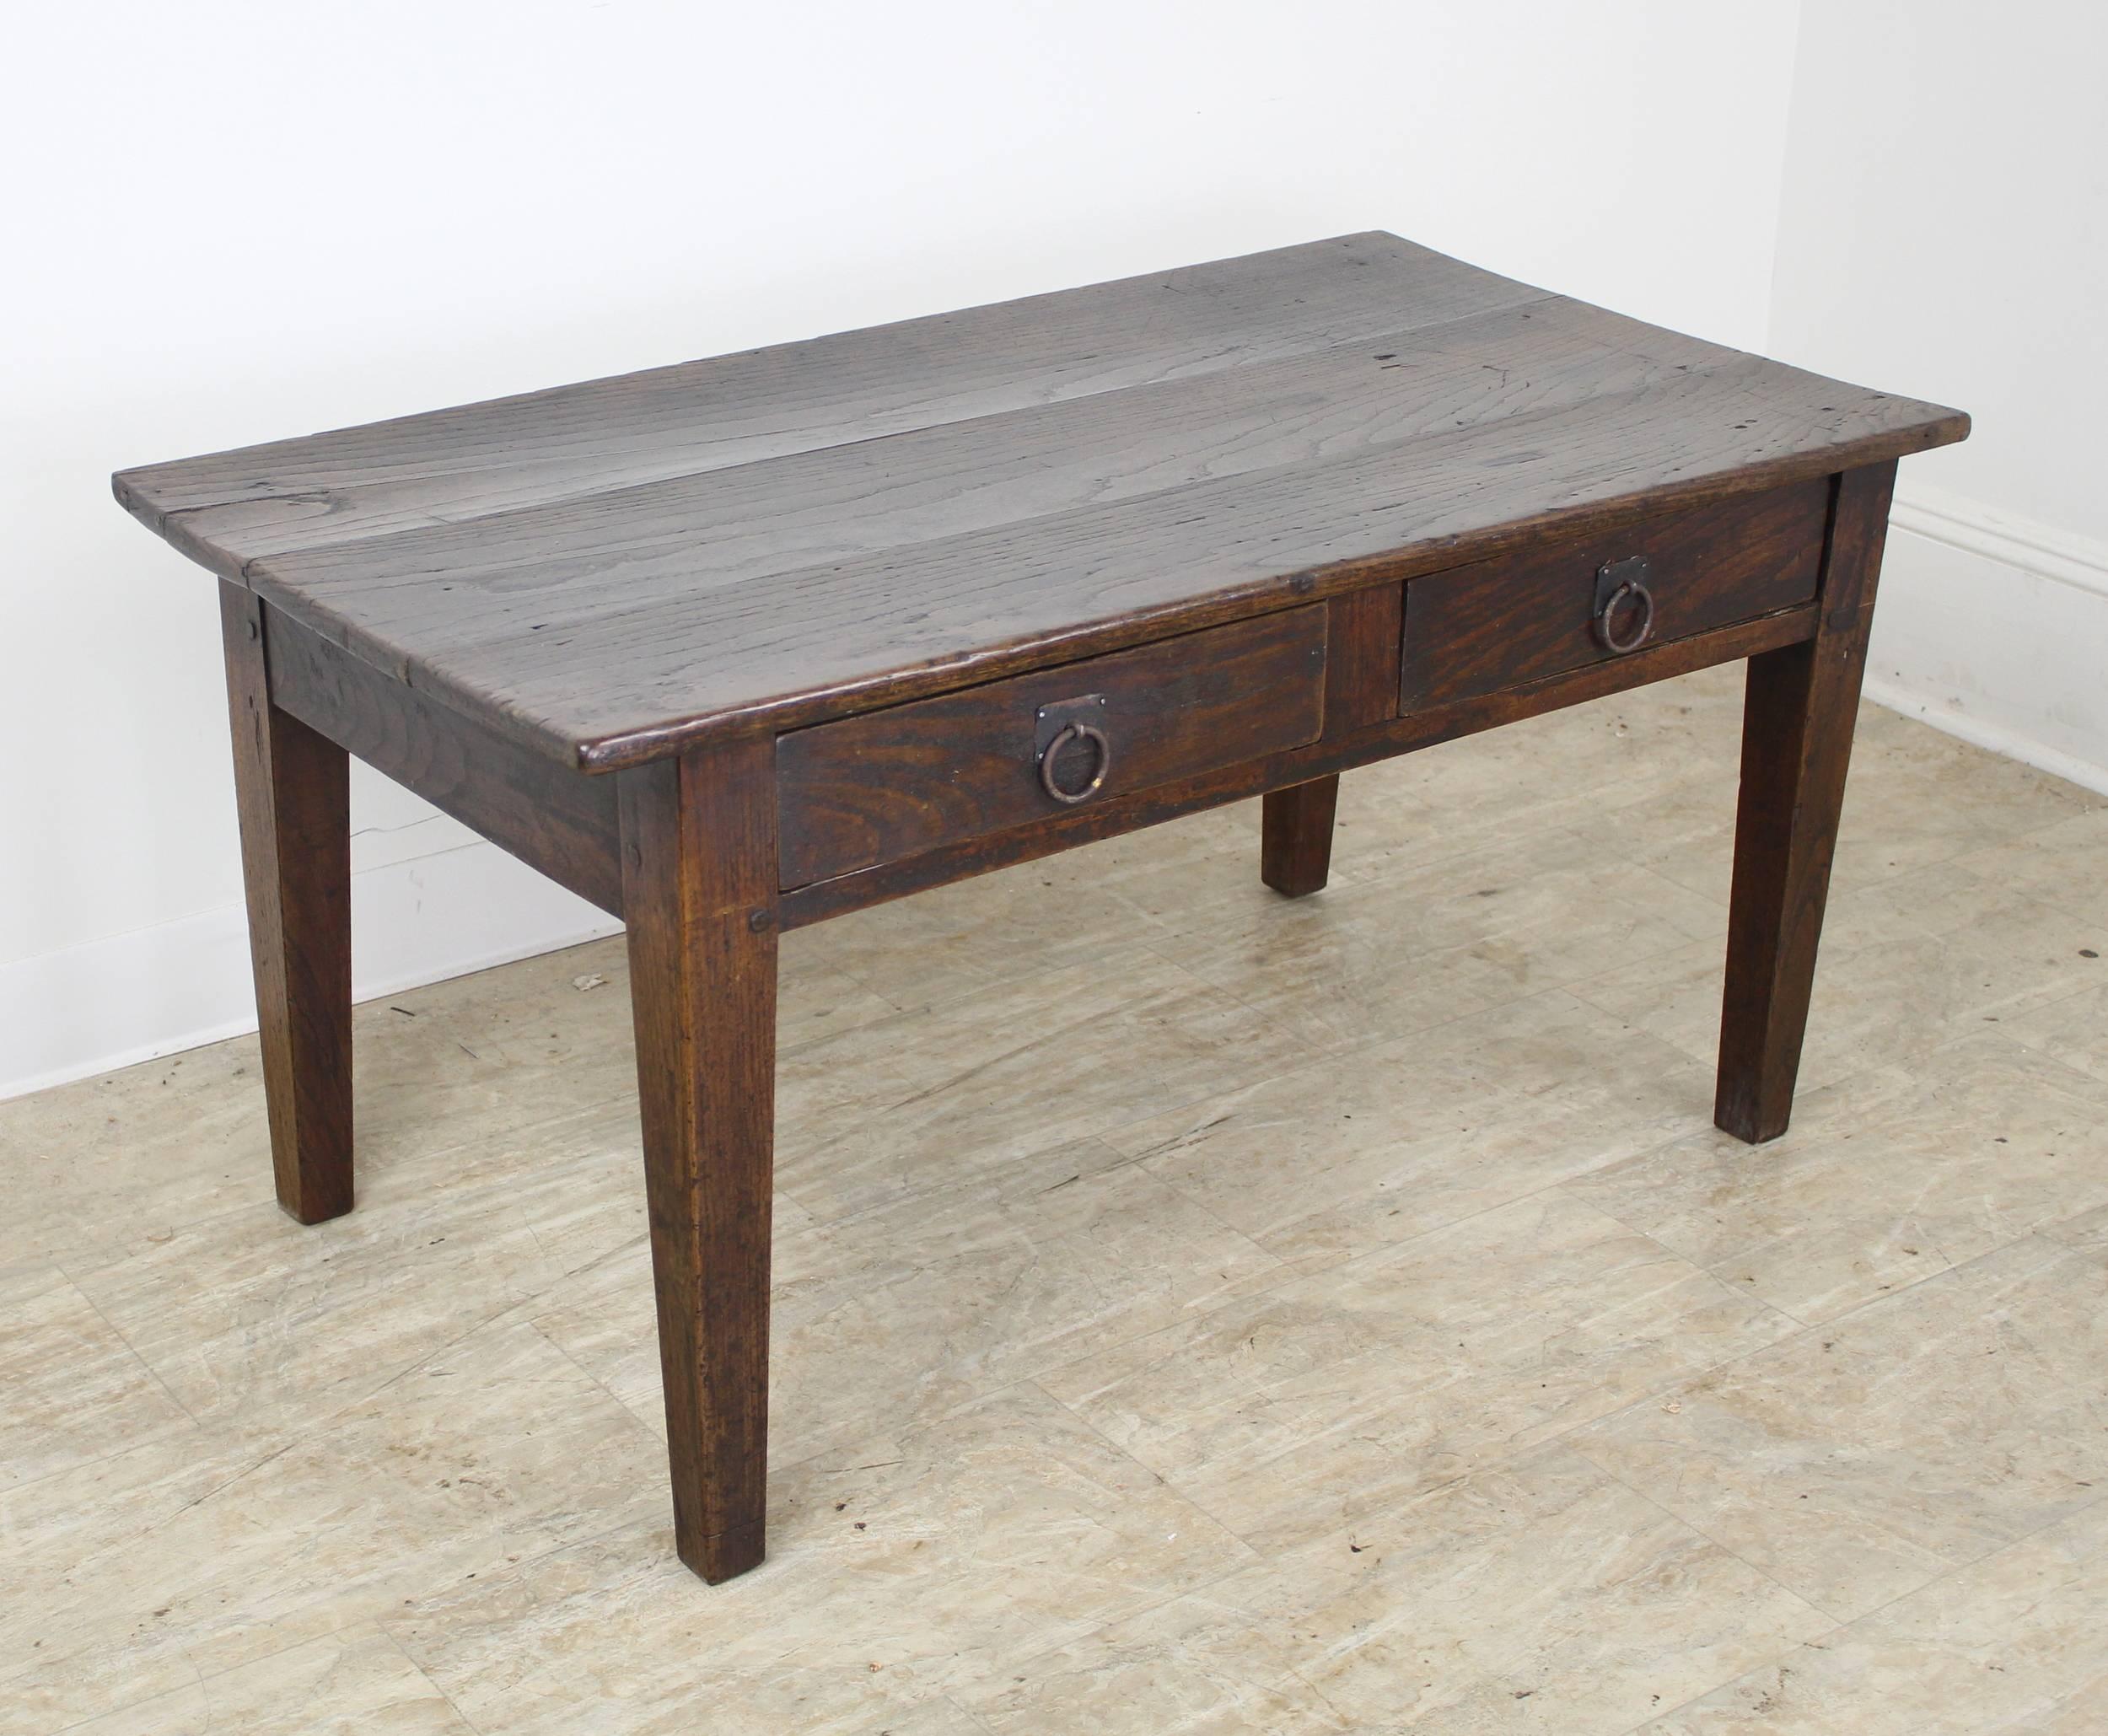 A sturdy and handsome dark chestnut coffee table, with two drawers for storage and visual interest. Wrought iron rings lend a rustic look. The chestnut has great grain and patina. Nice size for most rooms.